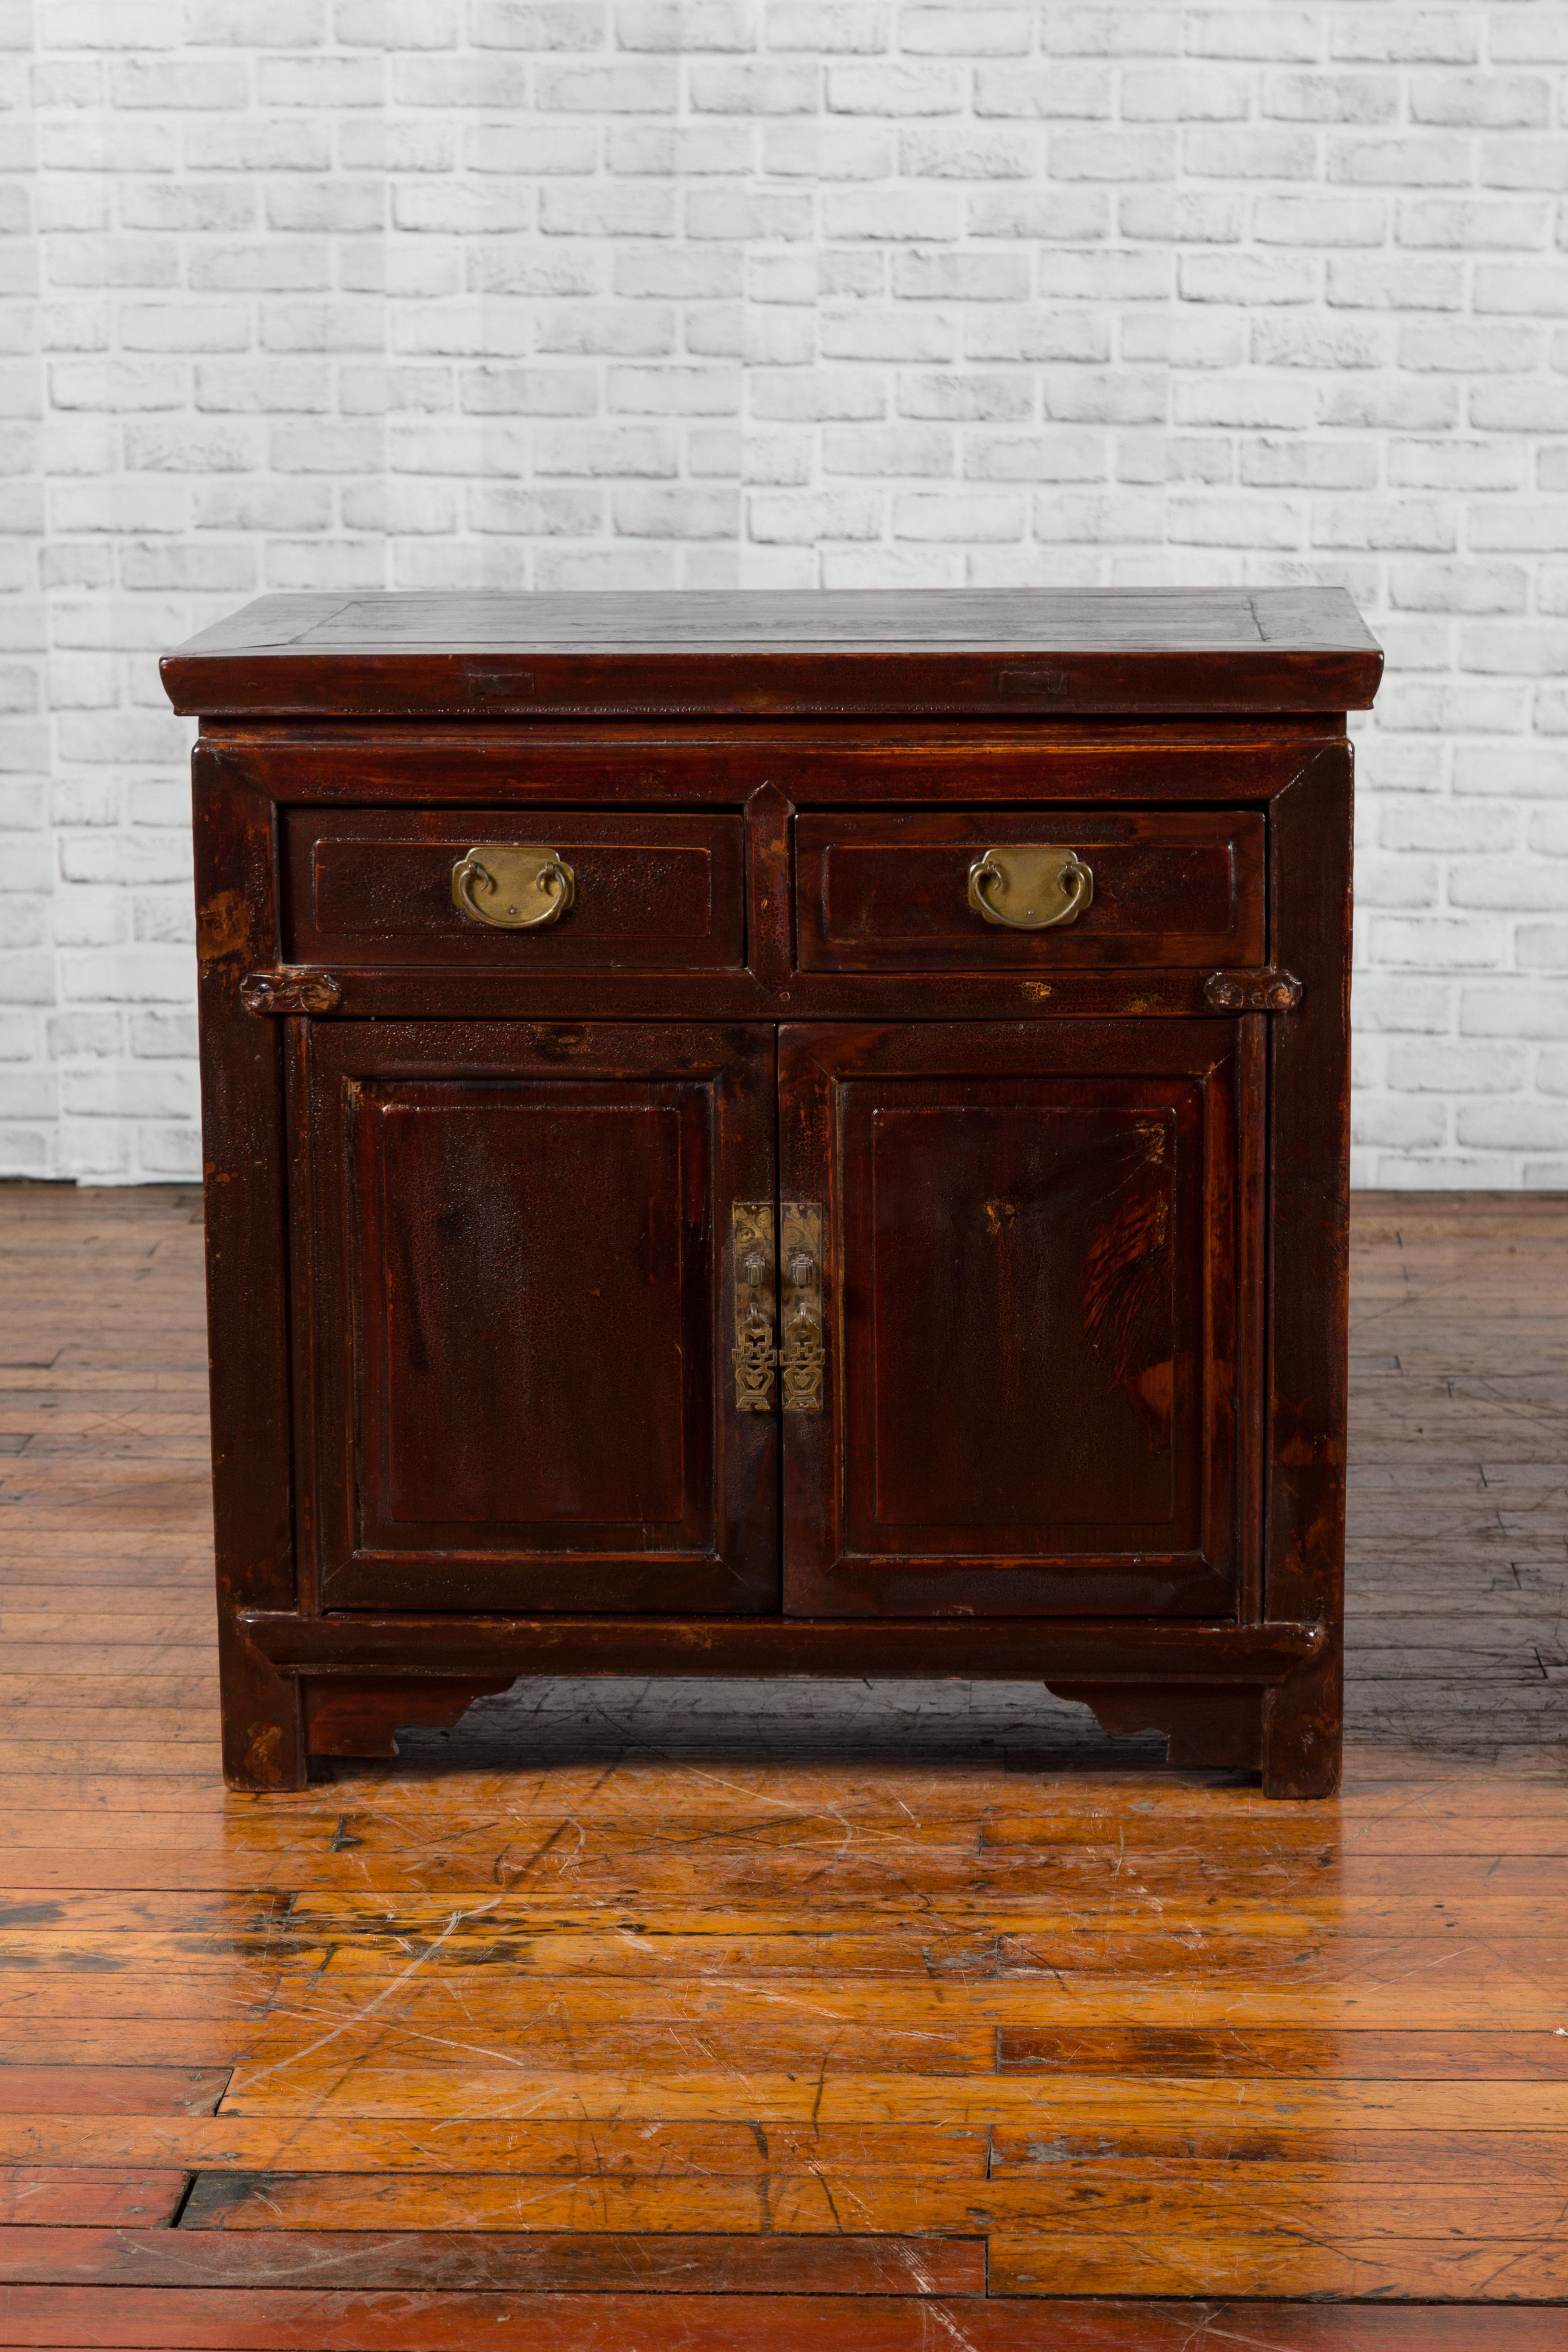 Wood Pair of Early 20th Century Chinese Bedside Cabinets with Reddish Brown Lacquer